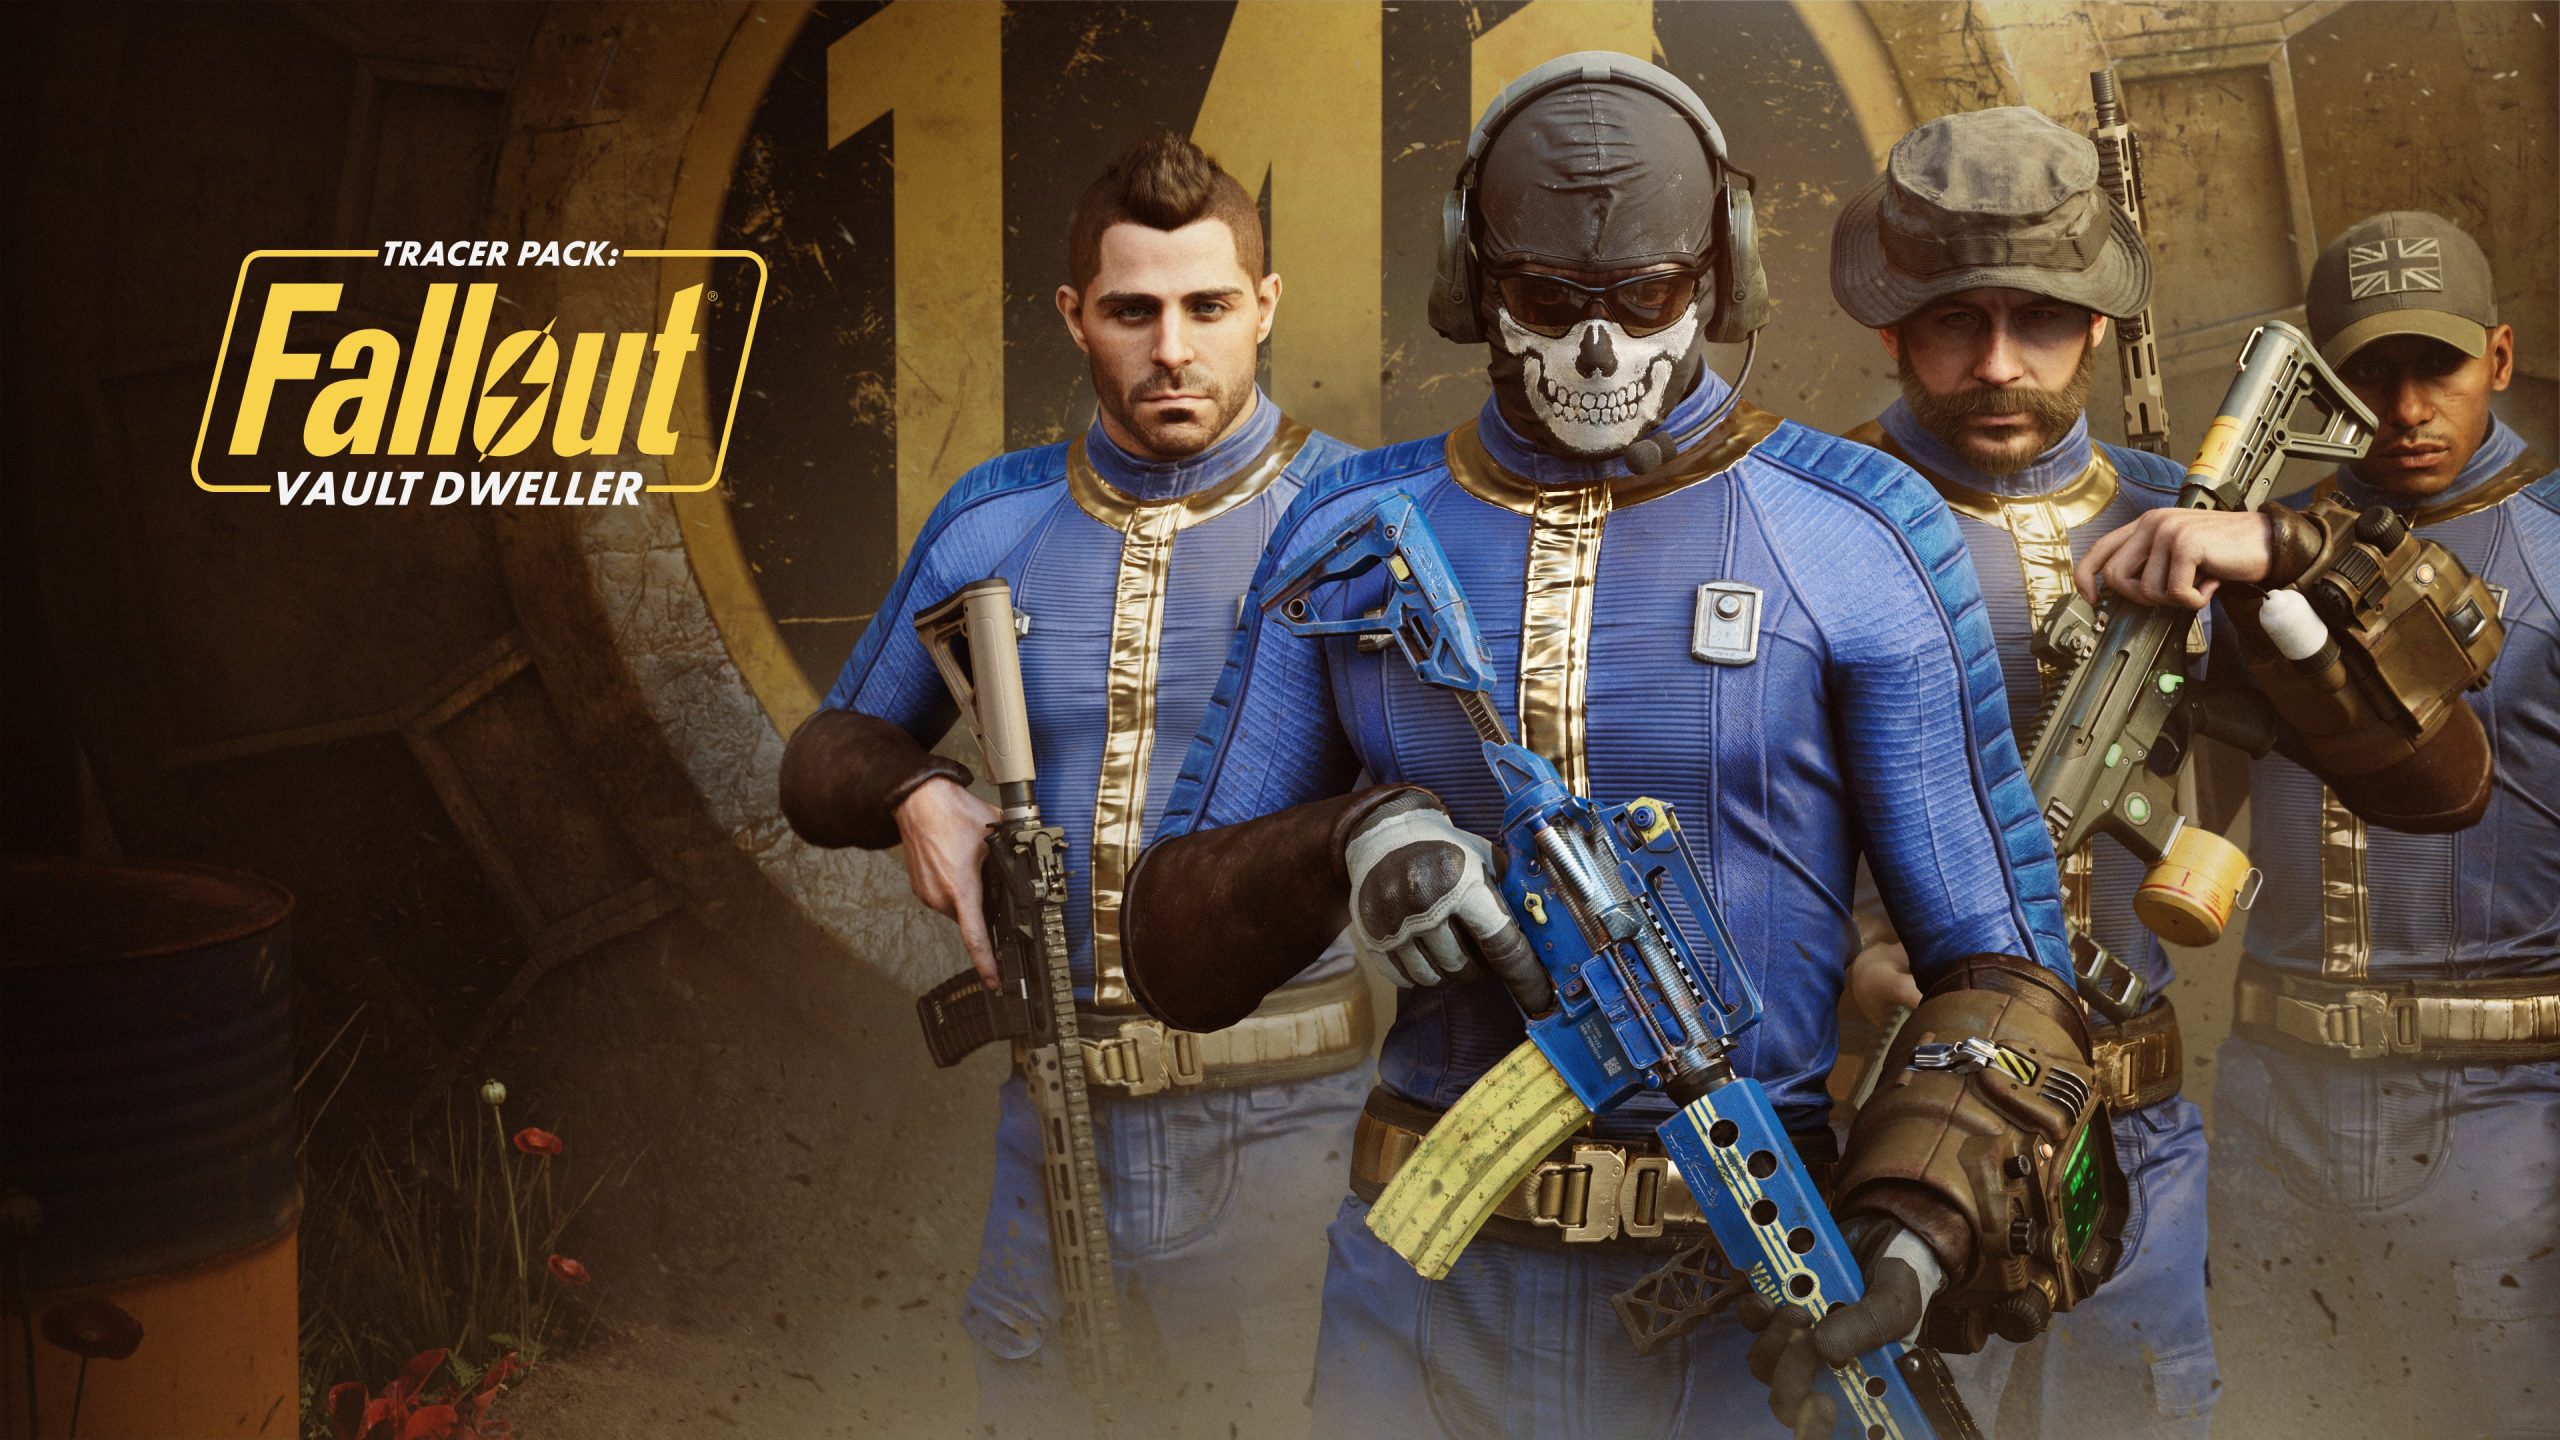 Fallout Vault Dweller Pack Leaked for Call of Duty